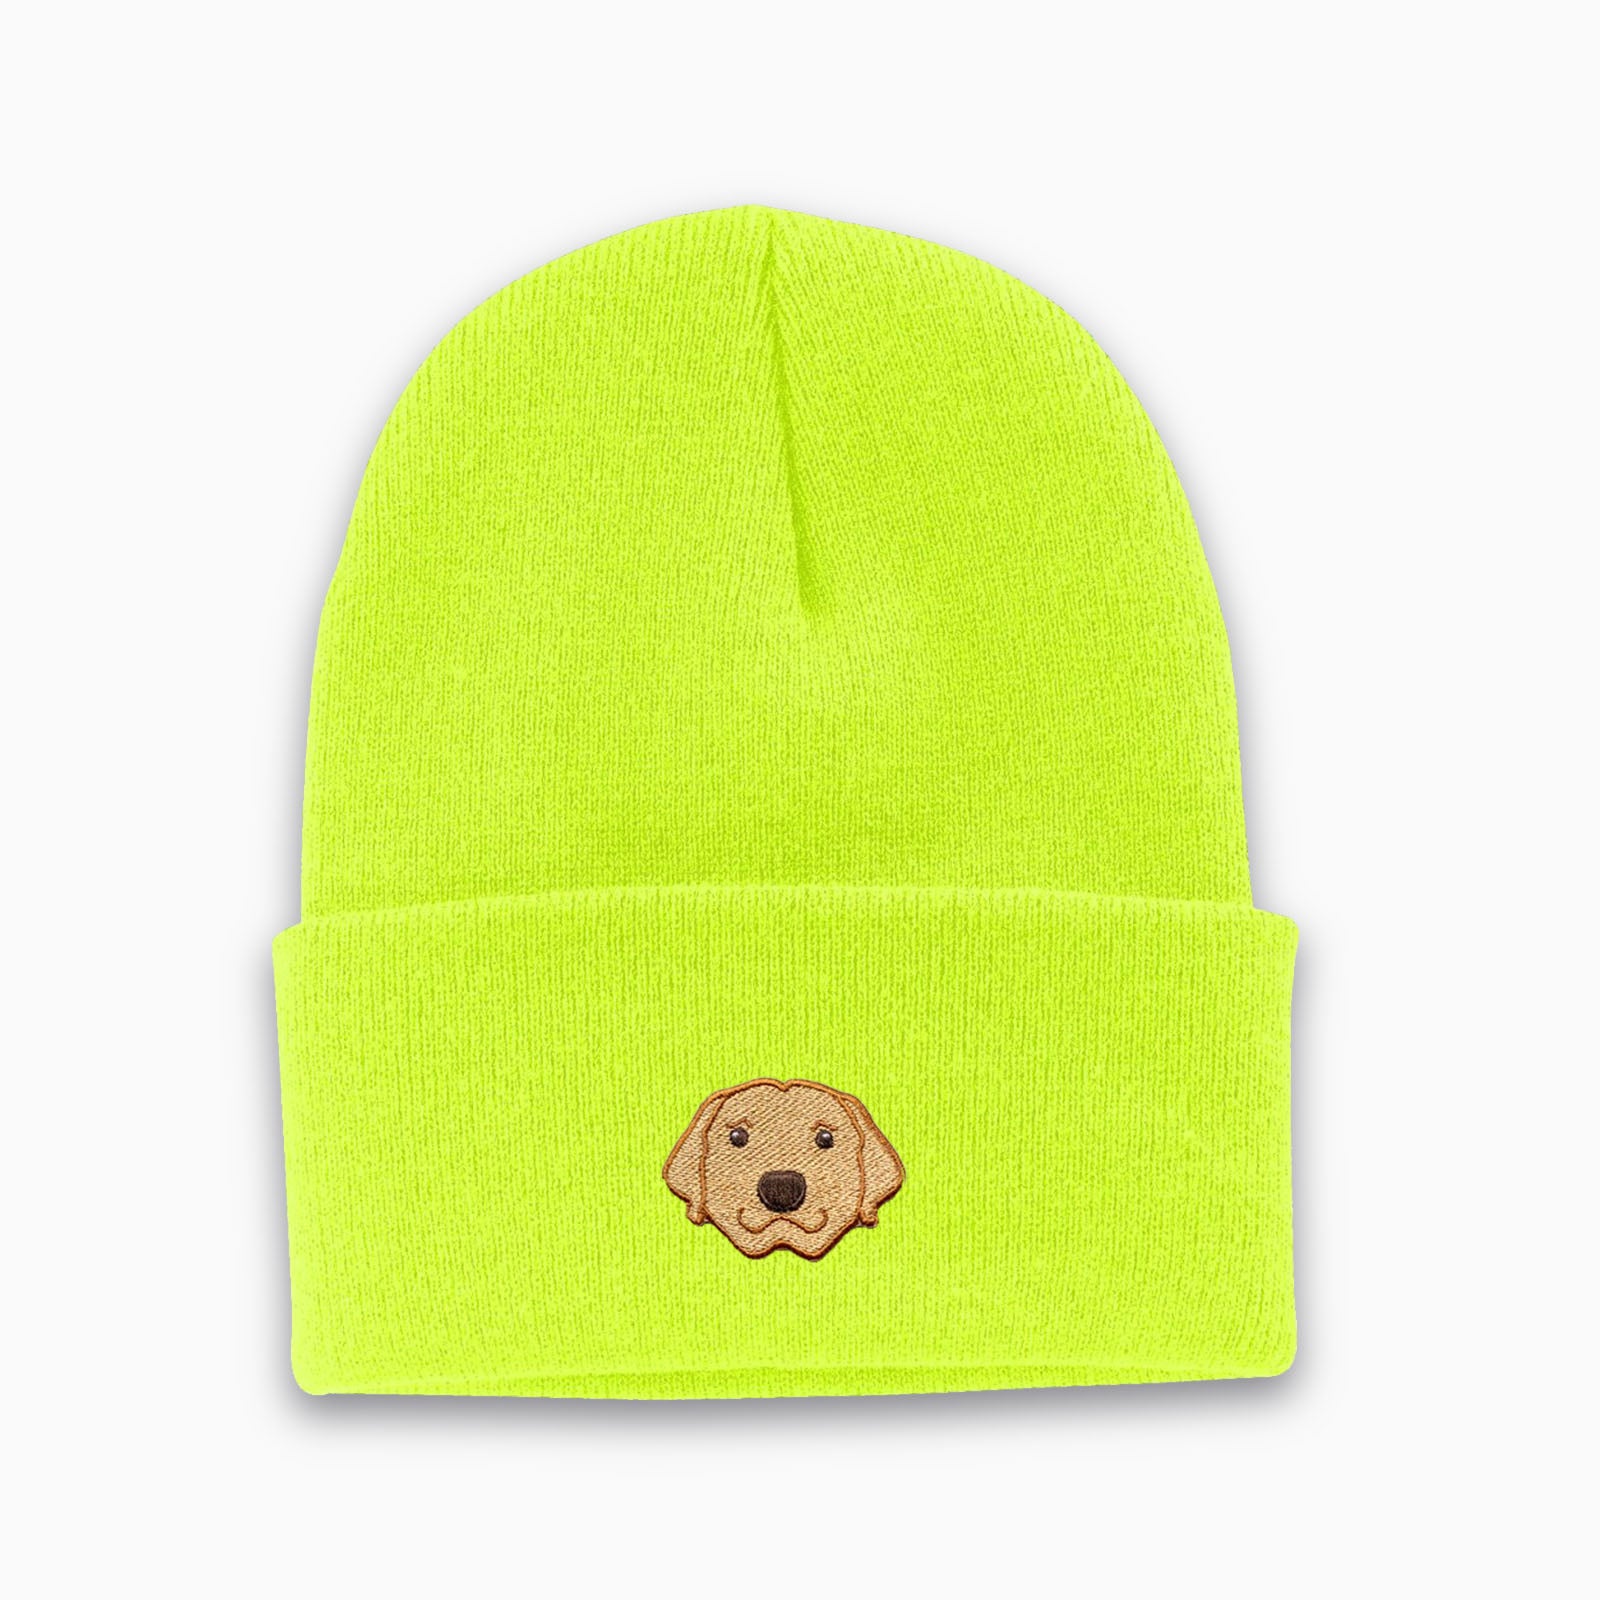 Neon Yellow Custome Dog beanie personalized and embroidered on the front.